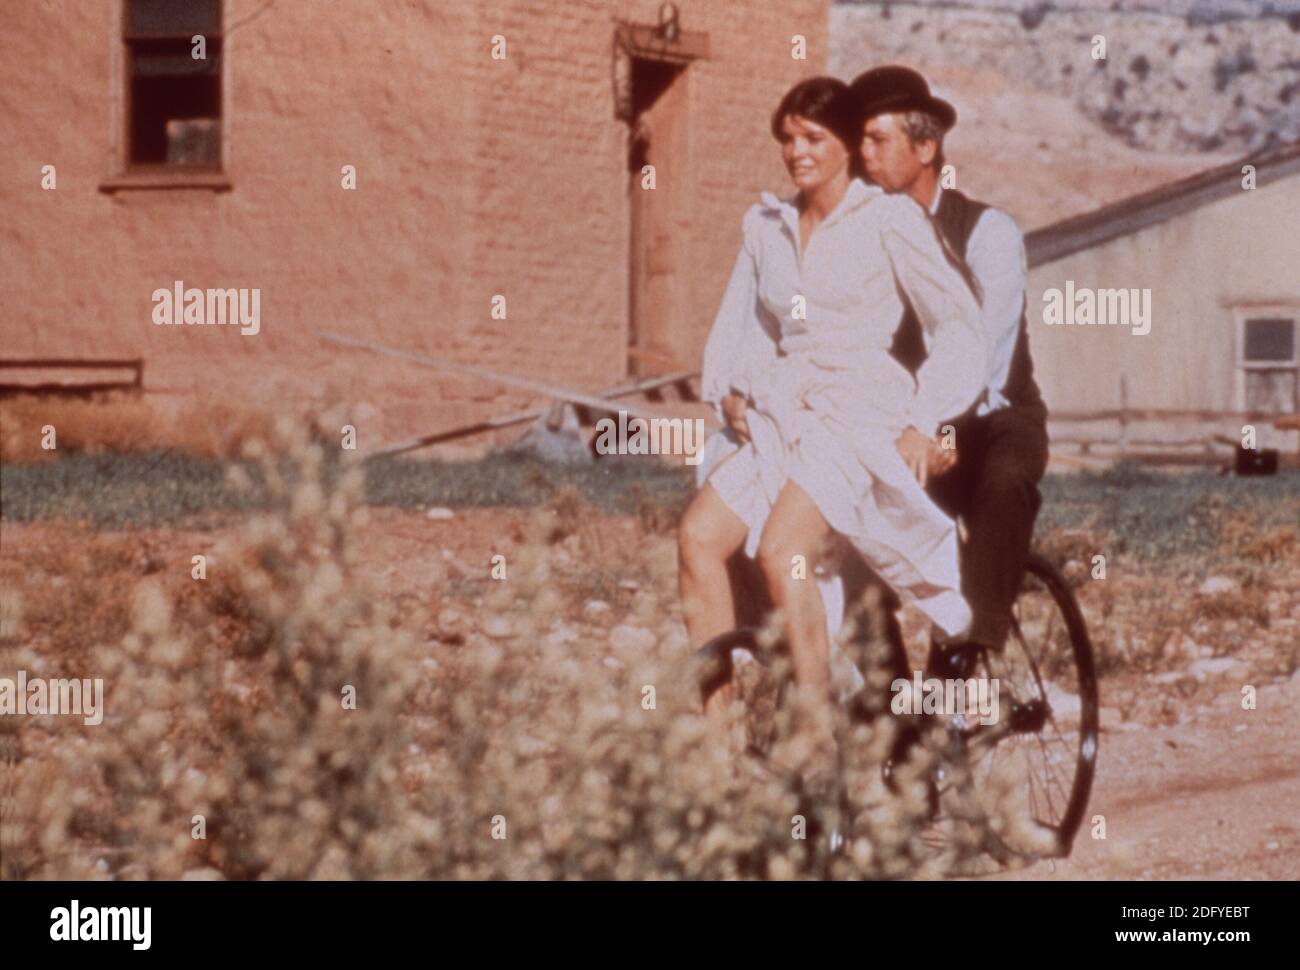 Butch Cassidy and the Sundance Kid stars Katherine Ross as Etta Place  and Paul Newman as Robert LeRoy Parker, known as Butch Cassidy Stock Photo